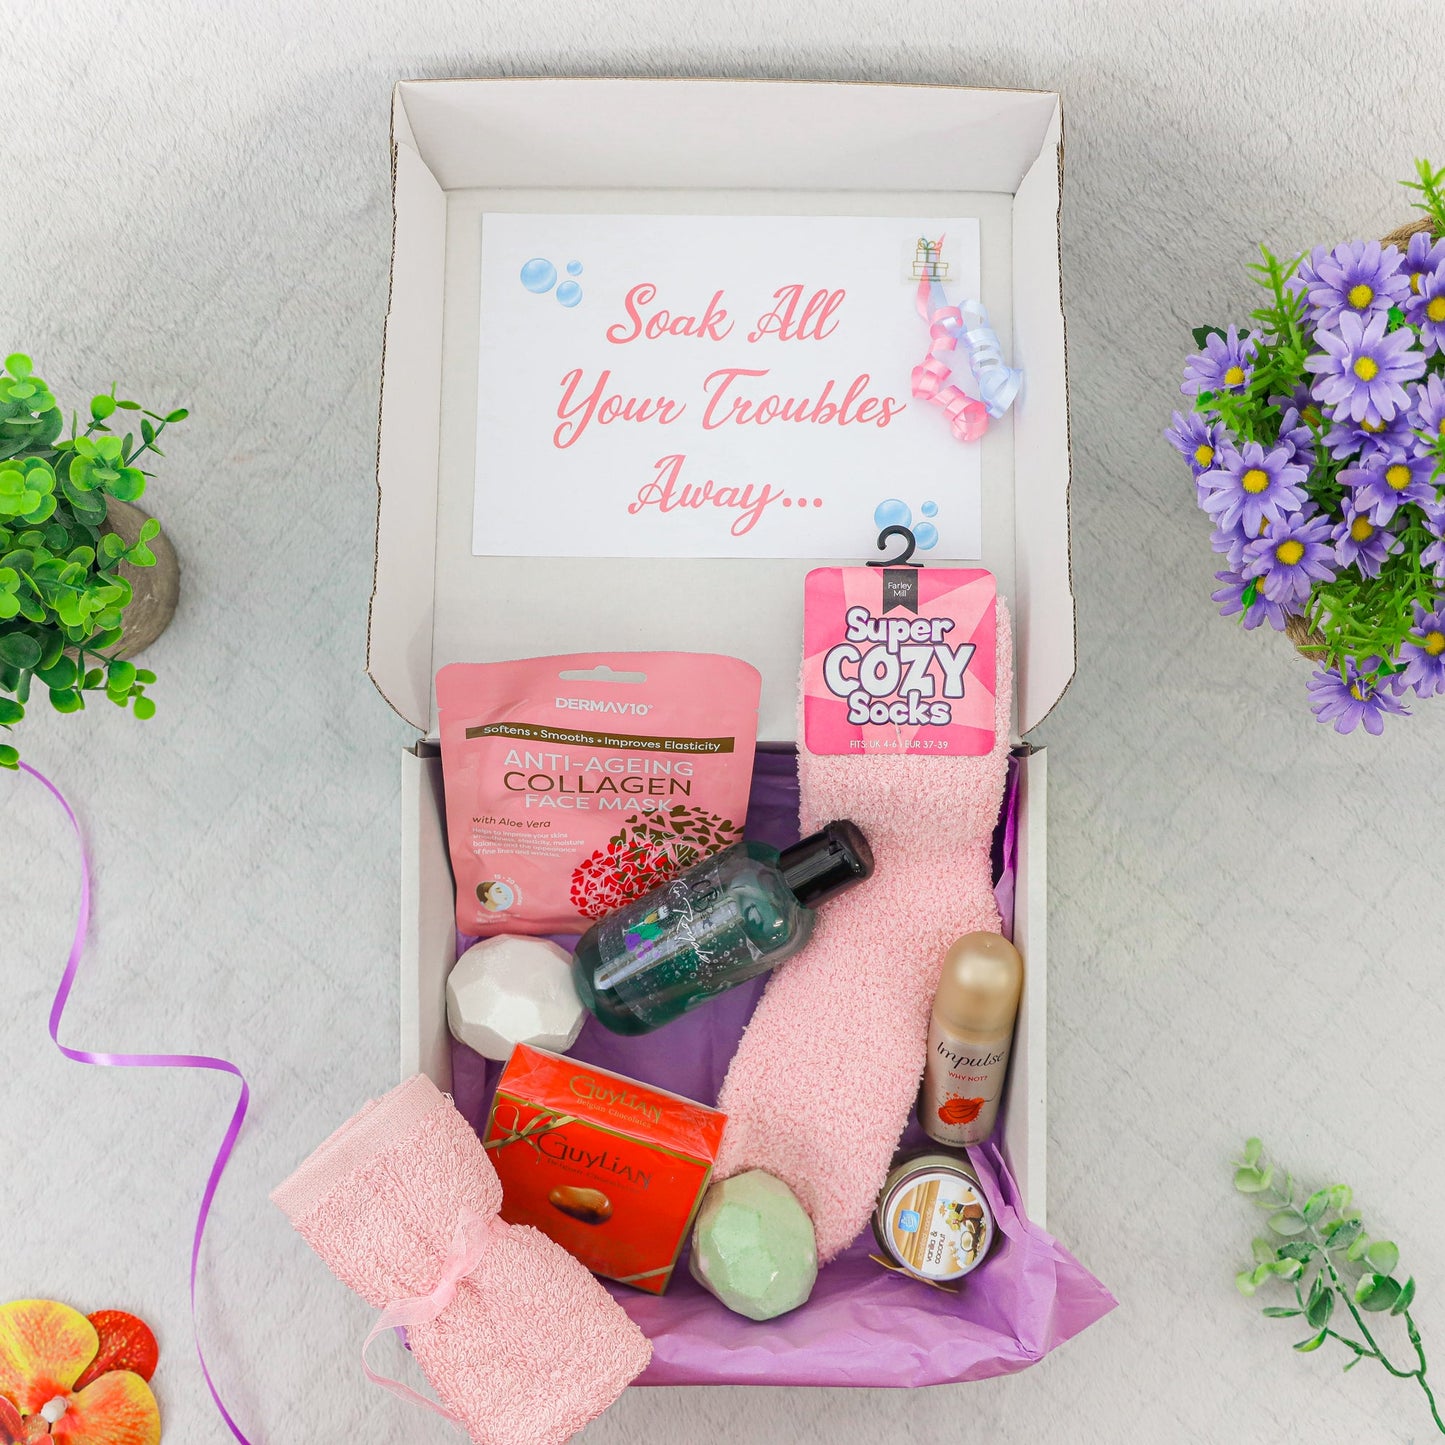 Mother's Day Ladies Pamper Hamper Bath Time Night In Gift Box  - Always Looking Good -   